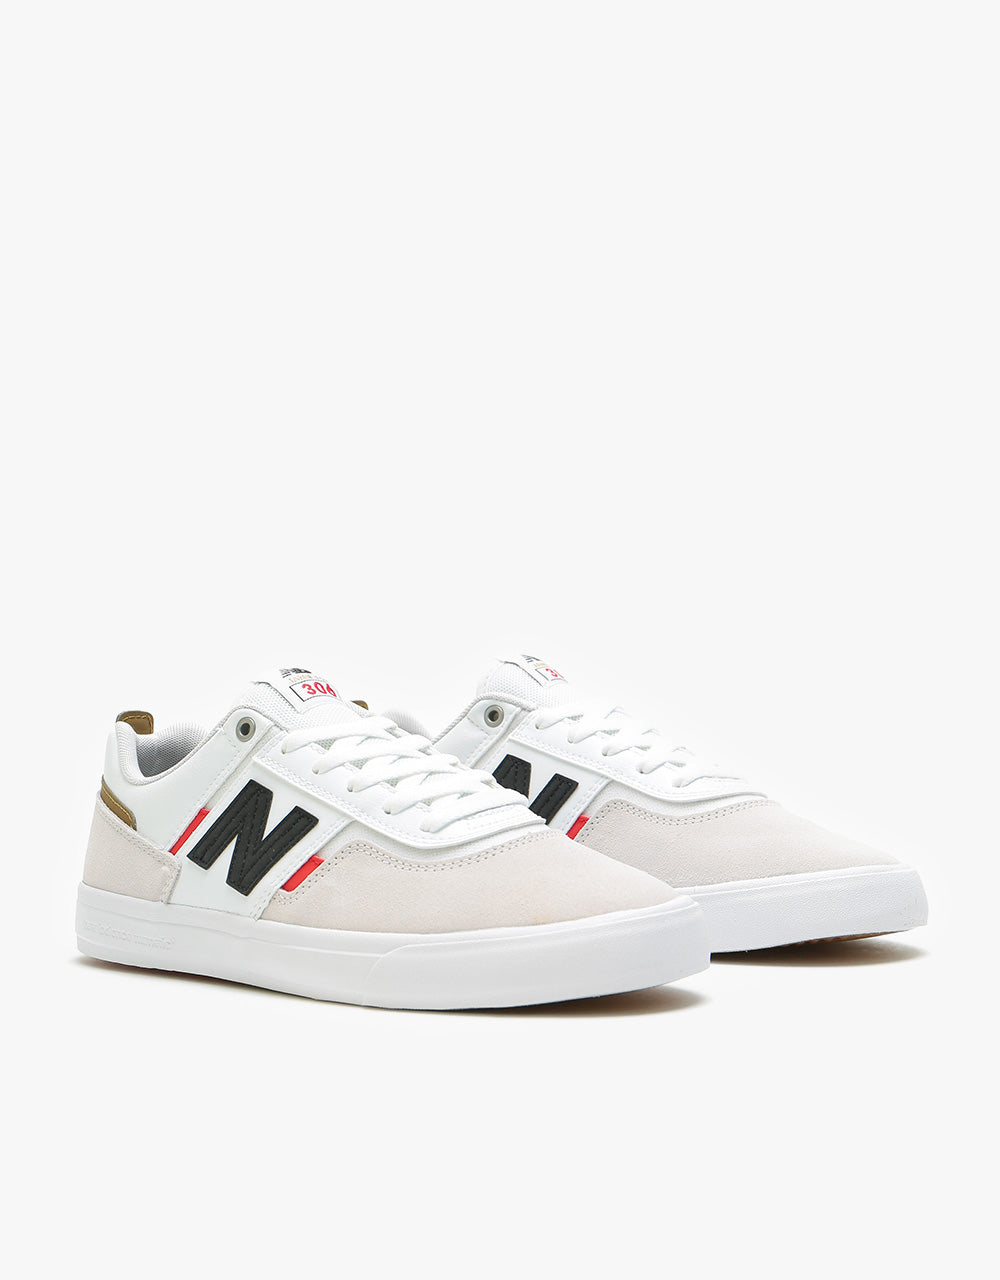 New Balance Numeric 306 Skate Shoes - White/Red